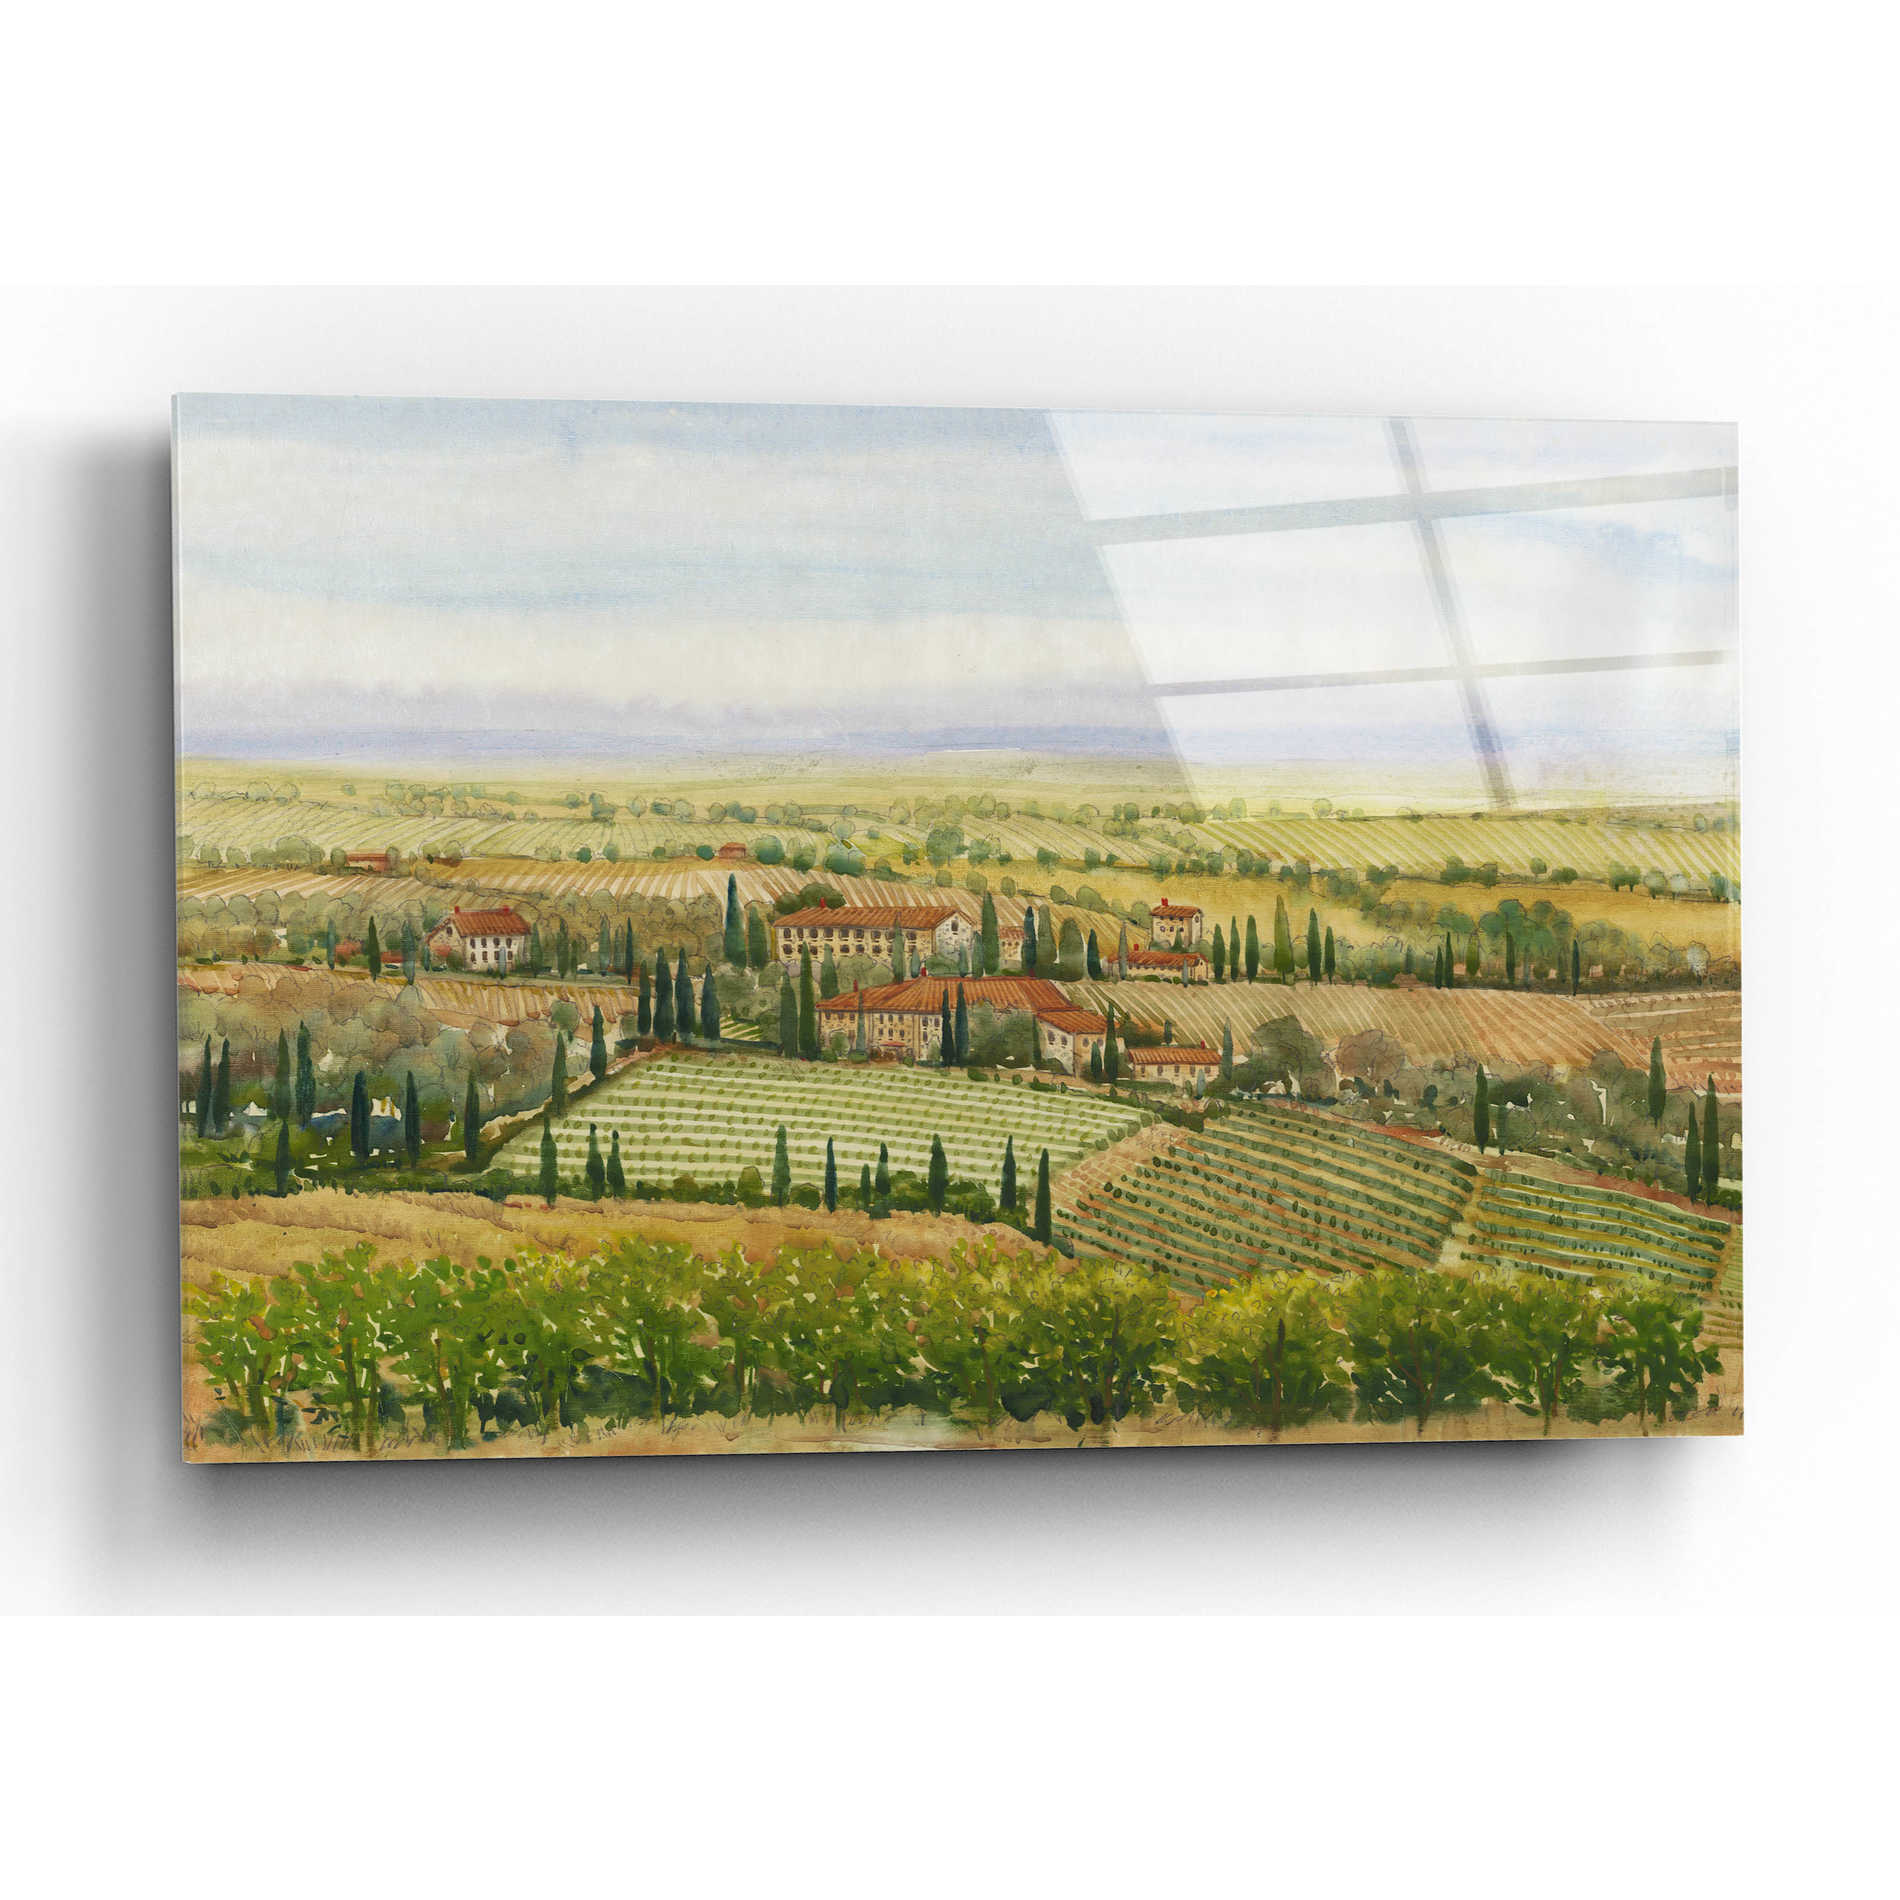 Epic Art 'Wine Country View II' by Tim O'Toole, Acrylic Glass Wall Art,16x12